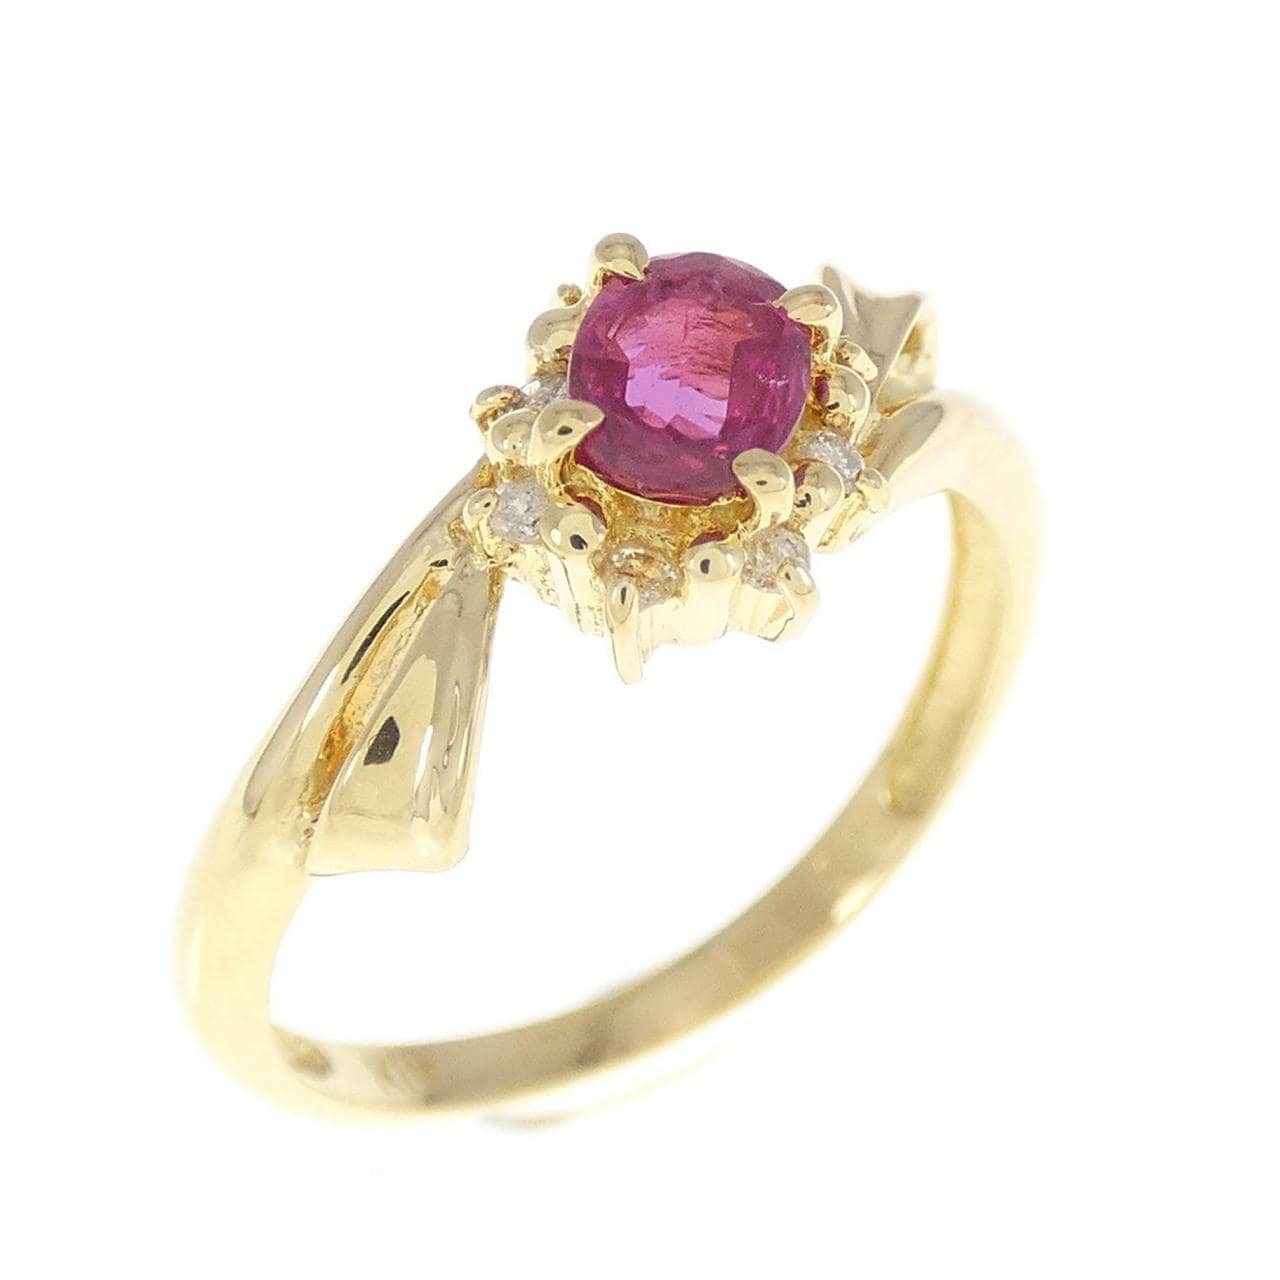 KOMEHYO|K18YG Ruby Ring|Jewelry|Ring|【Official】KOMEHYO, one of ...